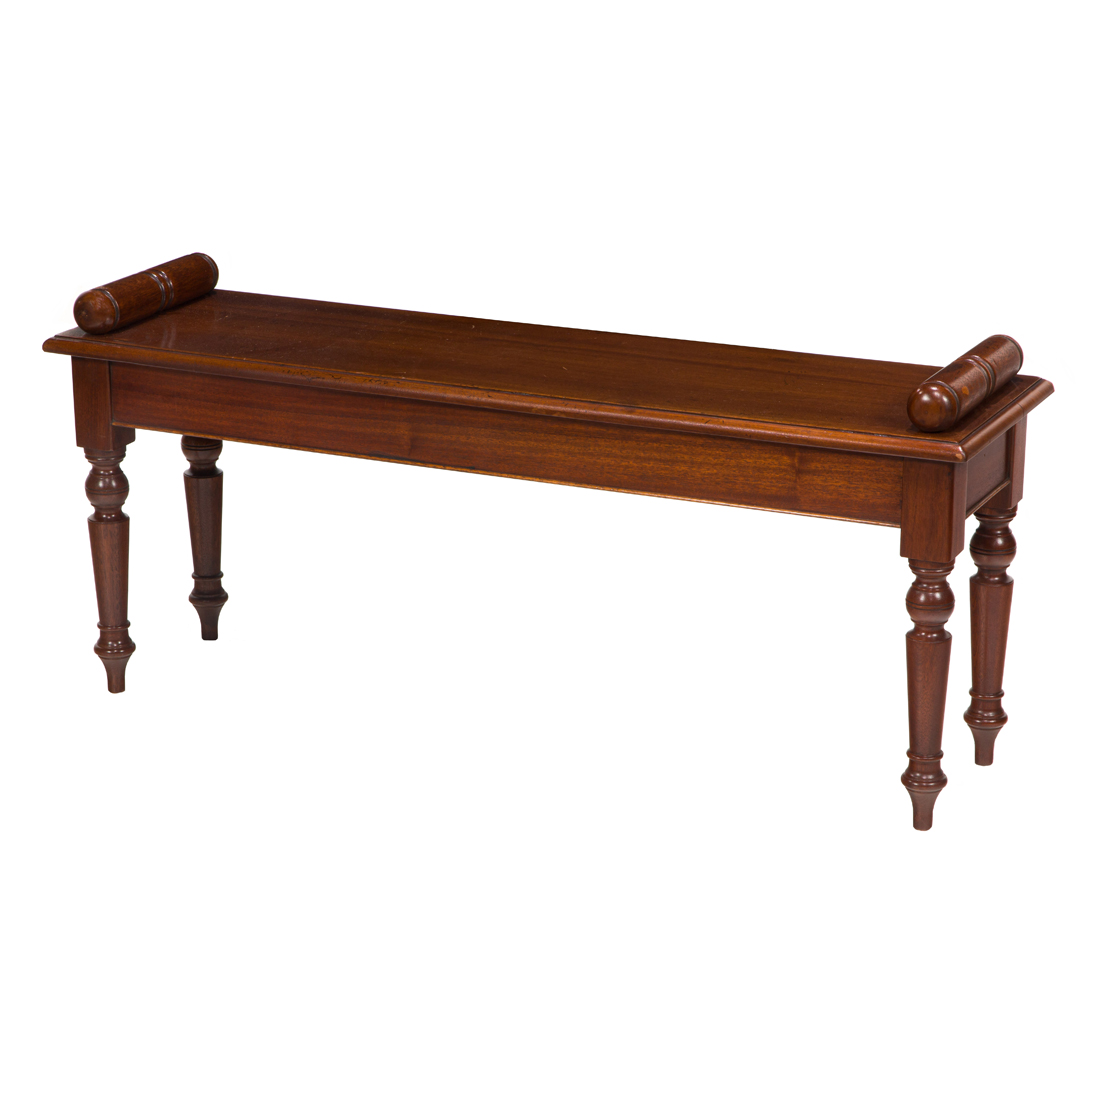 A CLASSICAL STYLE WINDOW BENCH